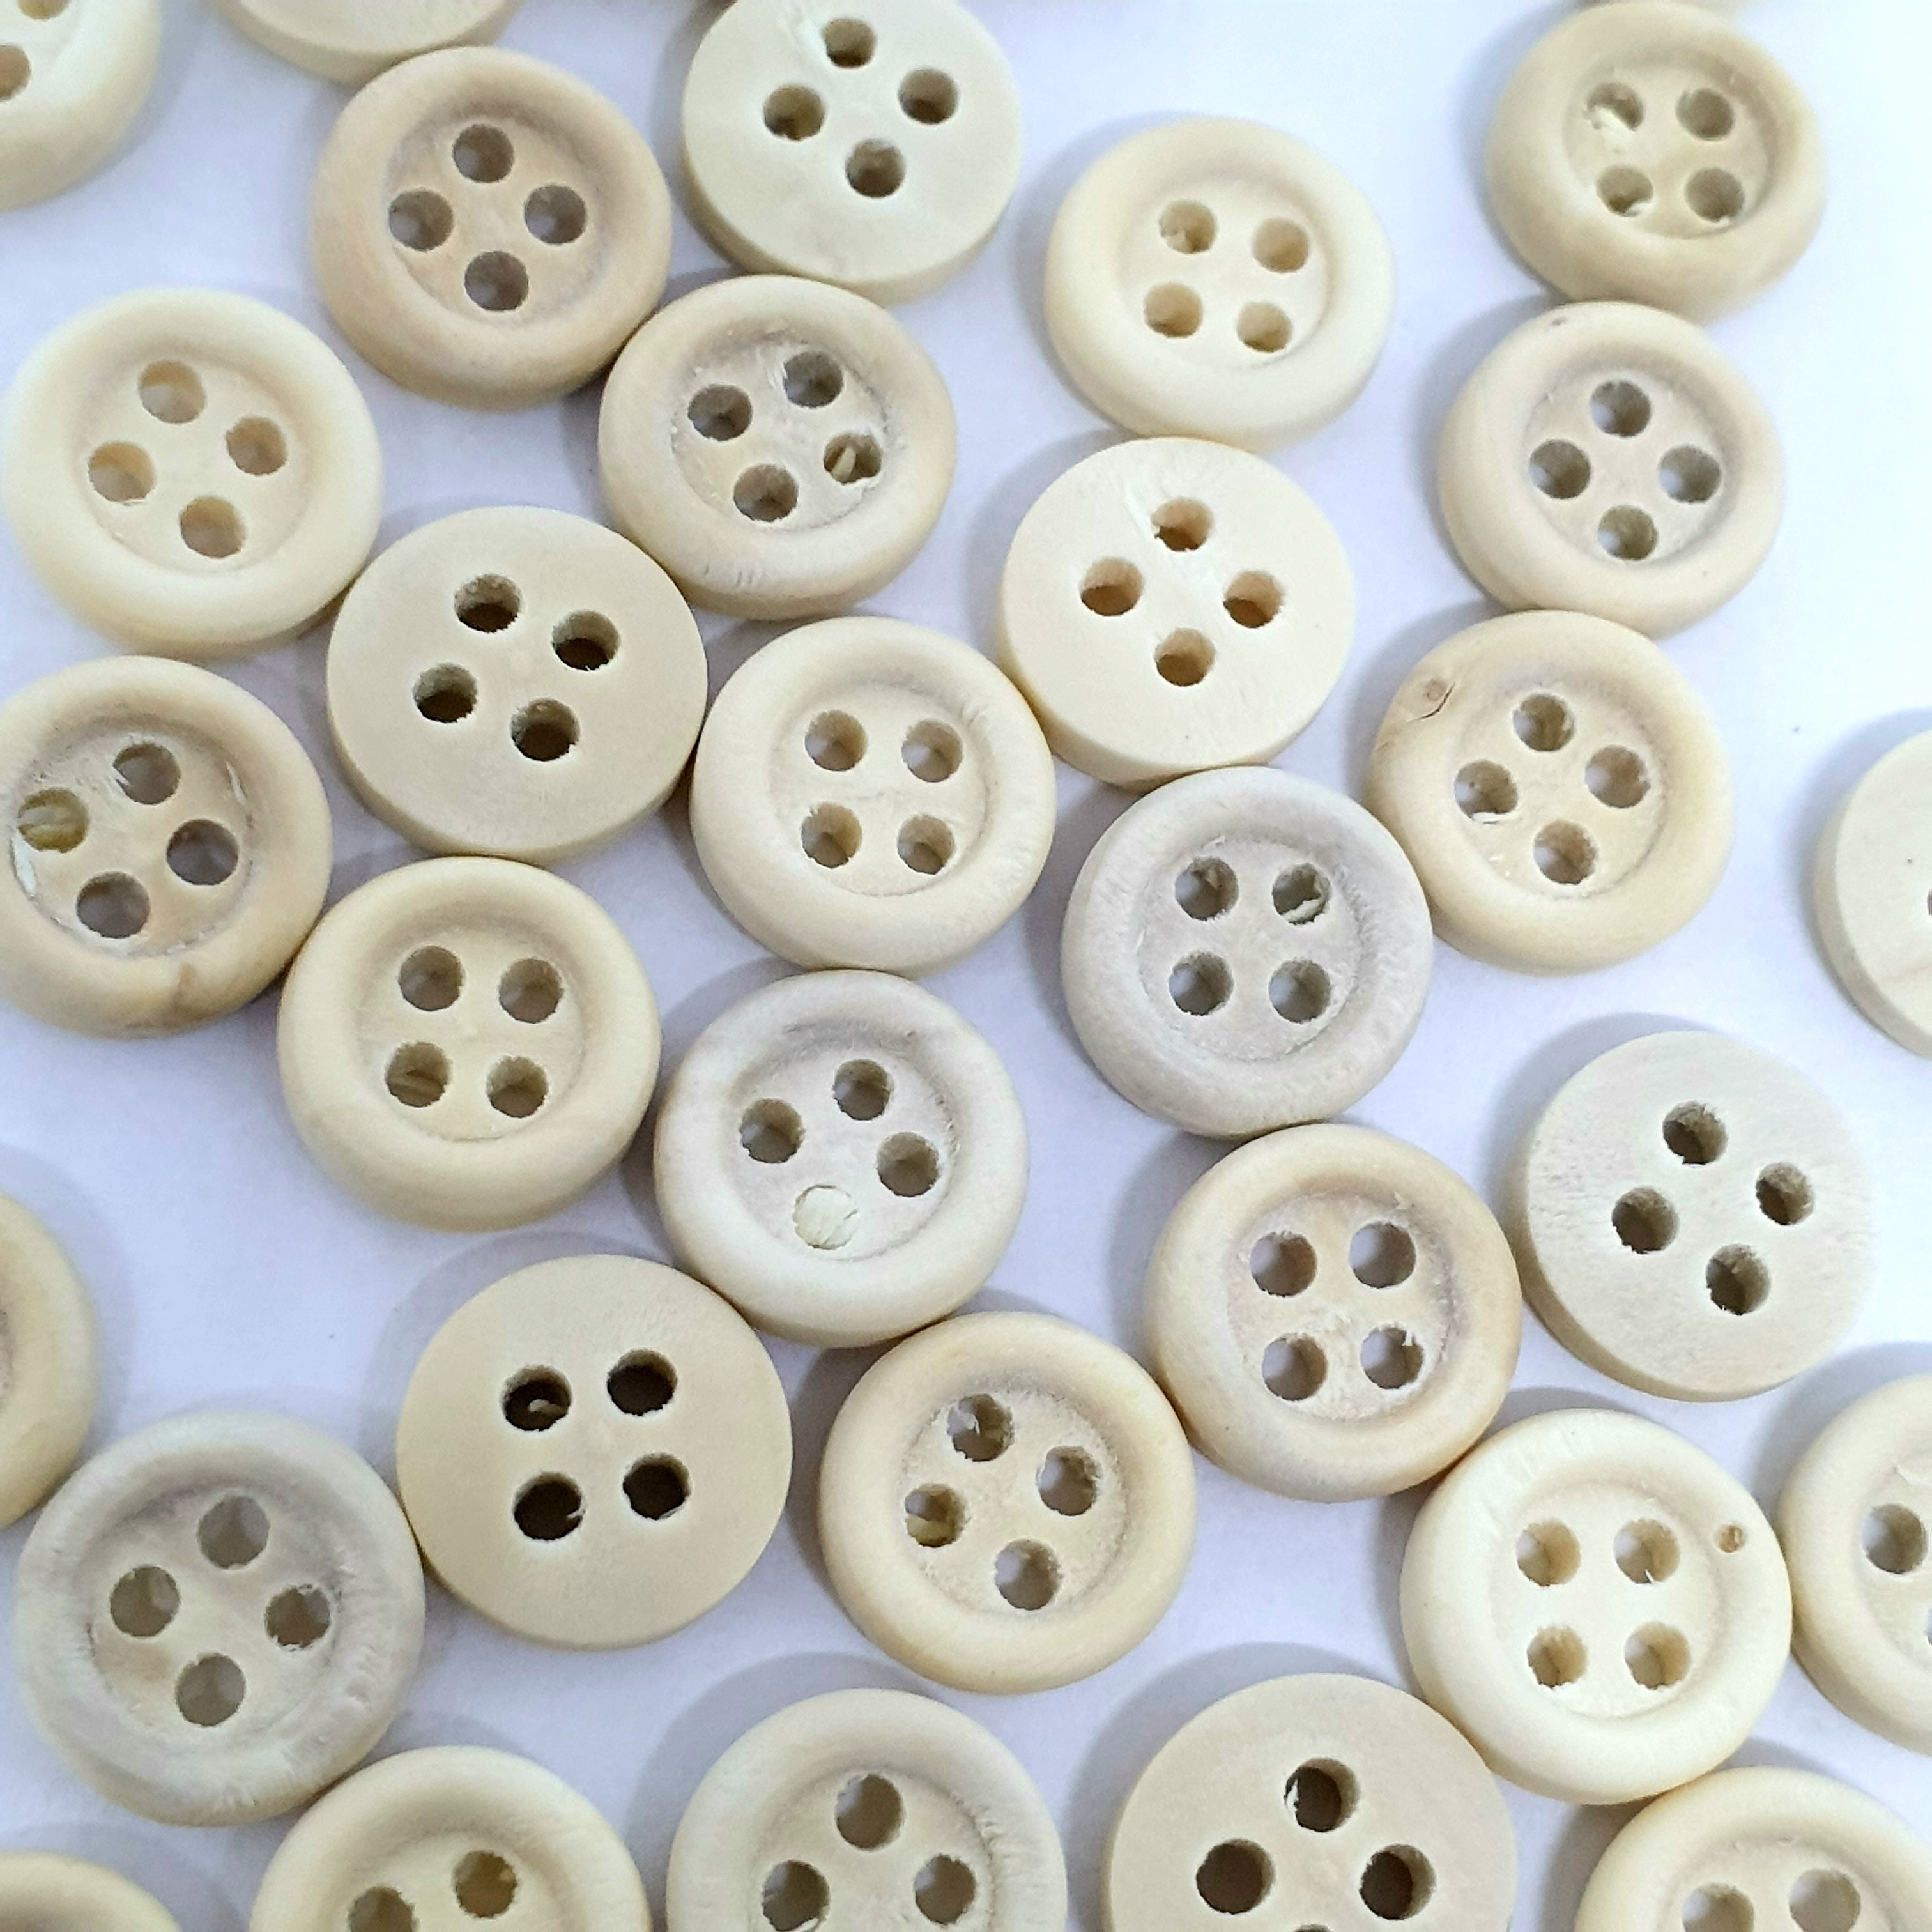 MajorCrafts 48pcs 10mm Light Brown Plain Round 4 Holes Small Wooden Sewing Buttons